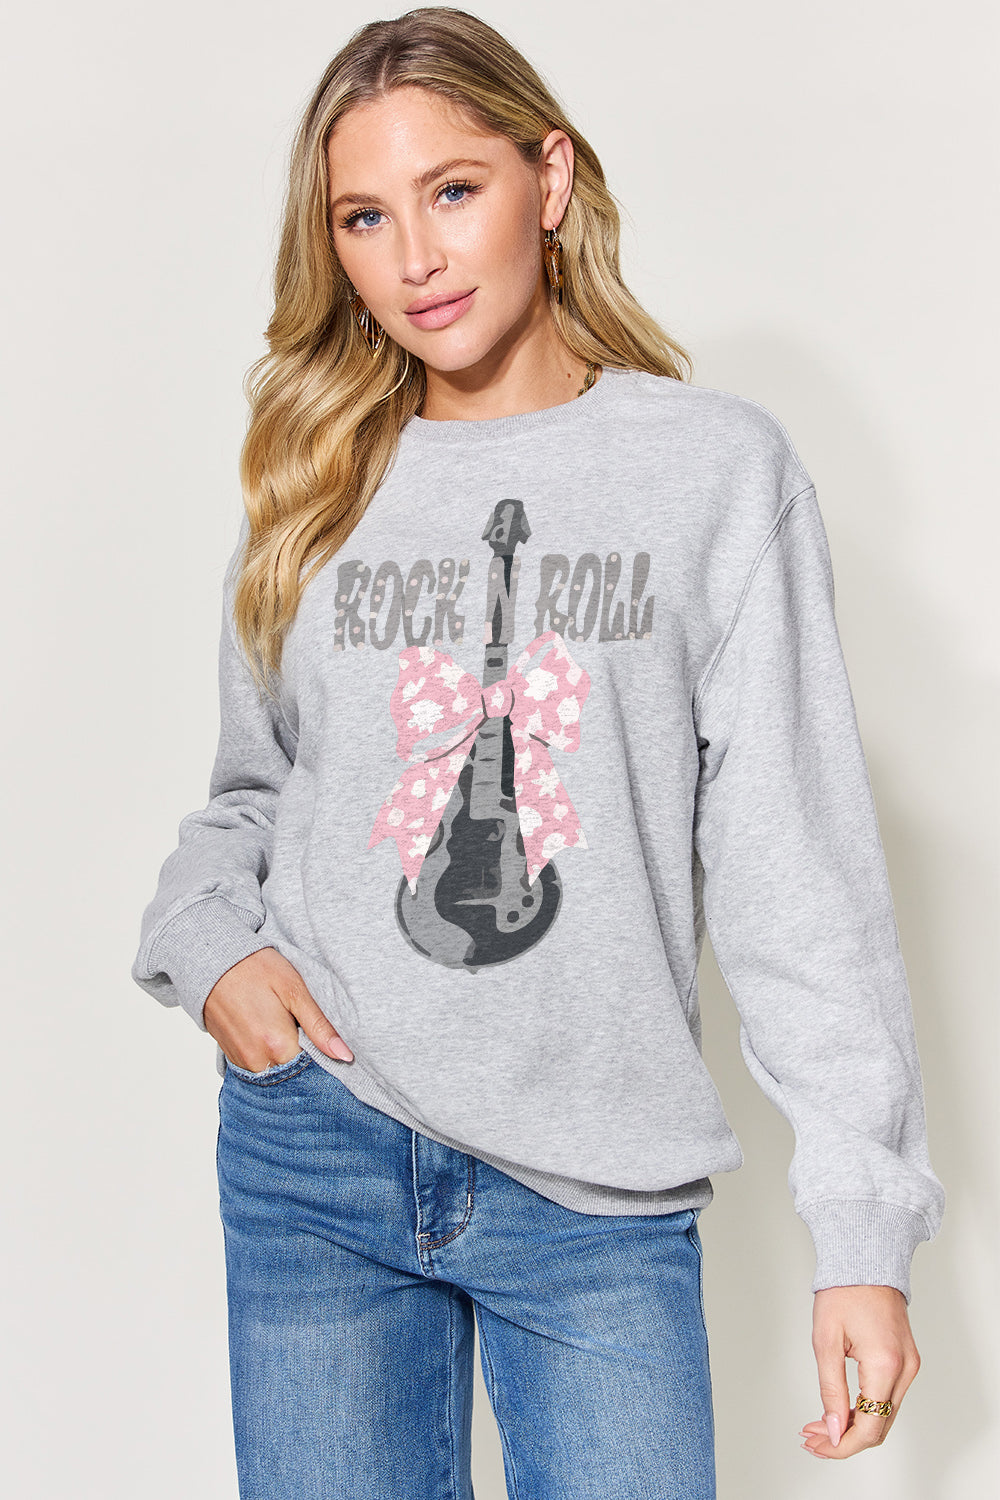 Simply Love Full Size Rock N Roll Guitar With a Bow Graphic Long Sleeve Sweatshirt